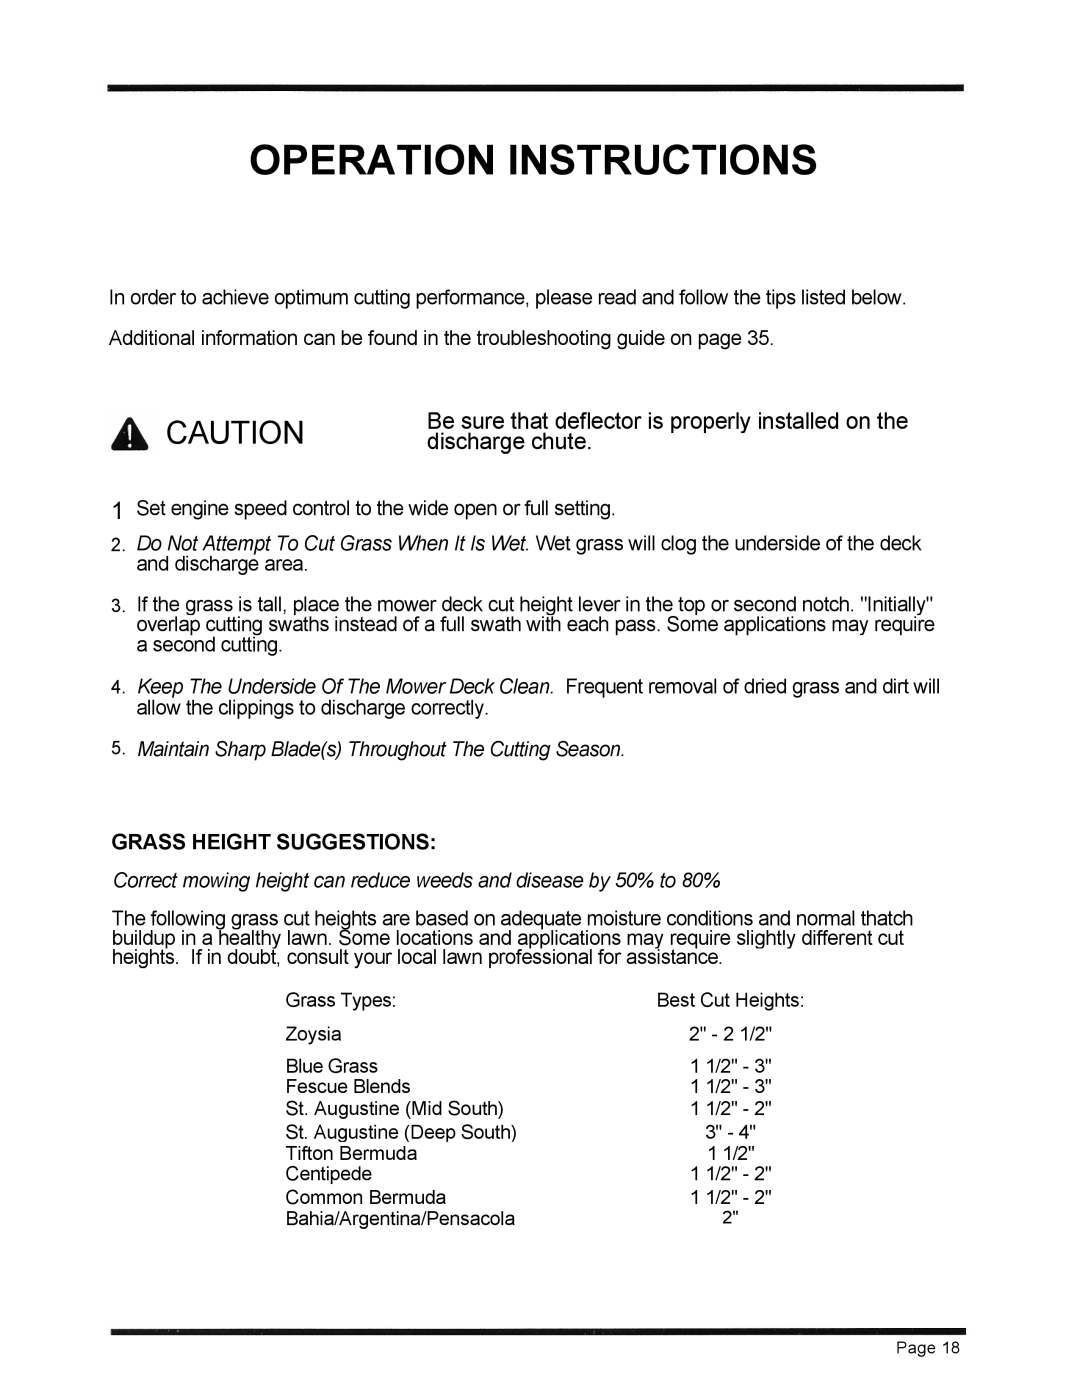 Dixon 6601 Series manual Operation Instructions, Grass Height Suggestions 